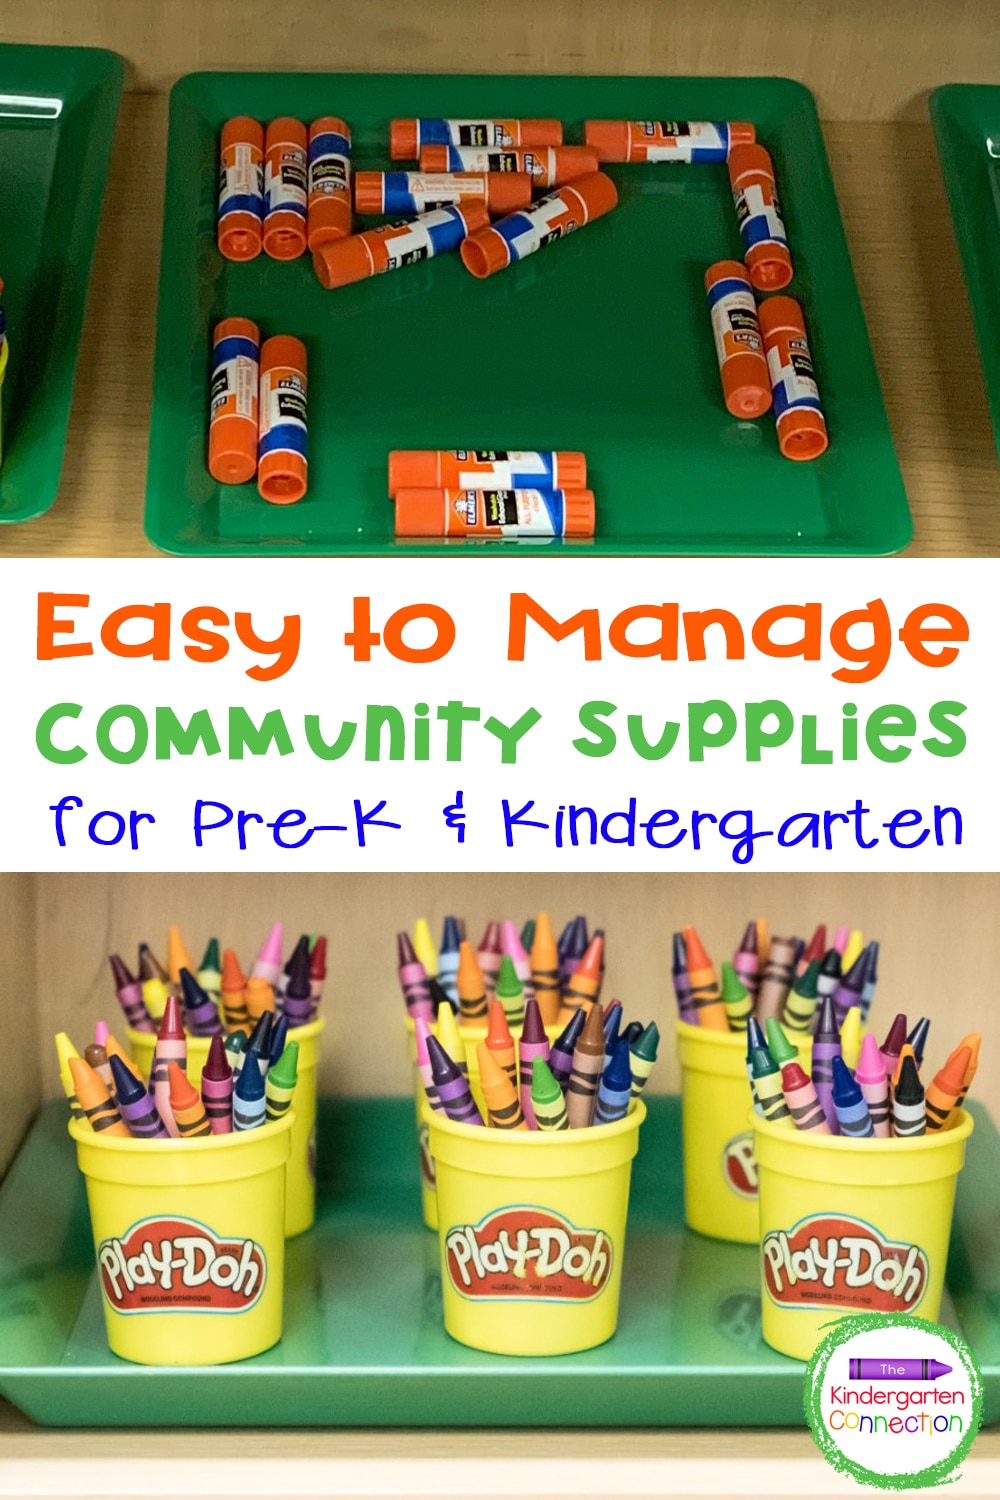 Check out my top tips for Easy to Manage Community Supplies for Pre-K & Kindergarten to make using them stress-free and easy to do!